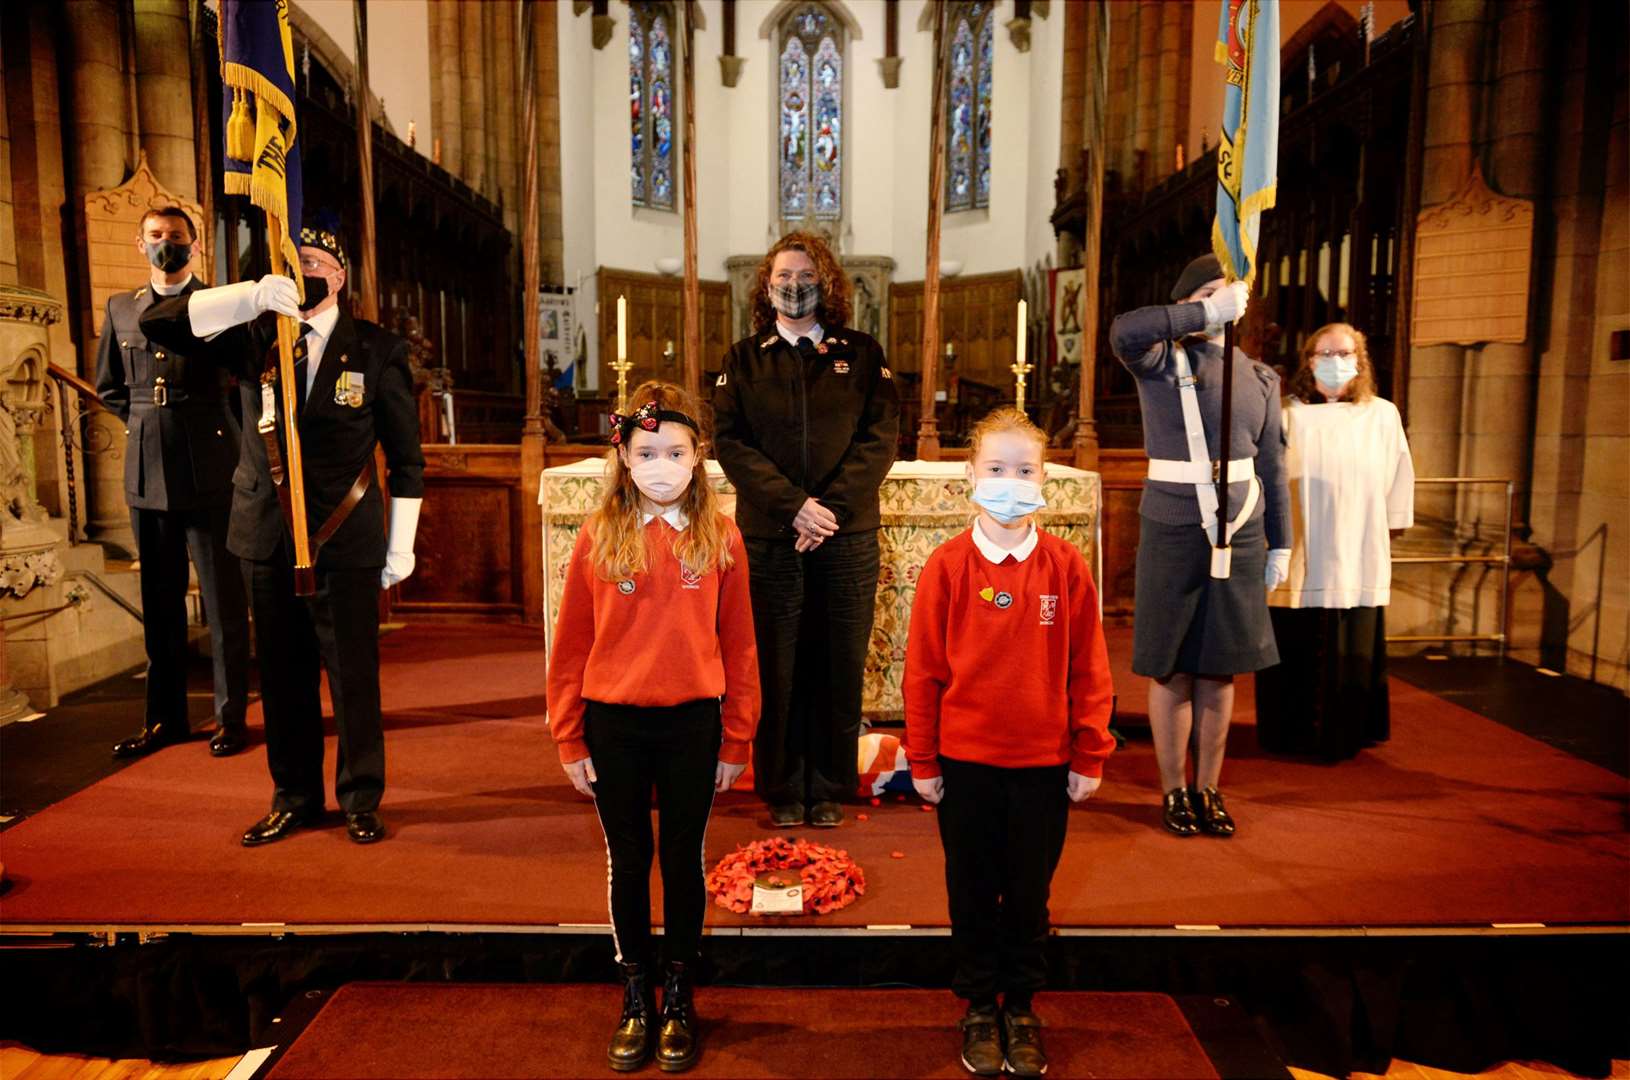 The service to mark the 80th anniversary of the ditching of the Wellington bomber was recorded in Inverness Cathedral.